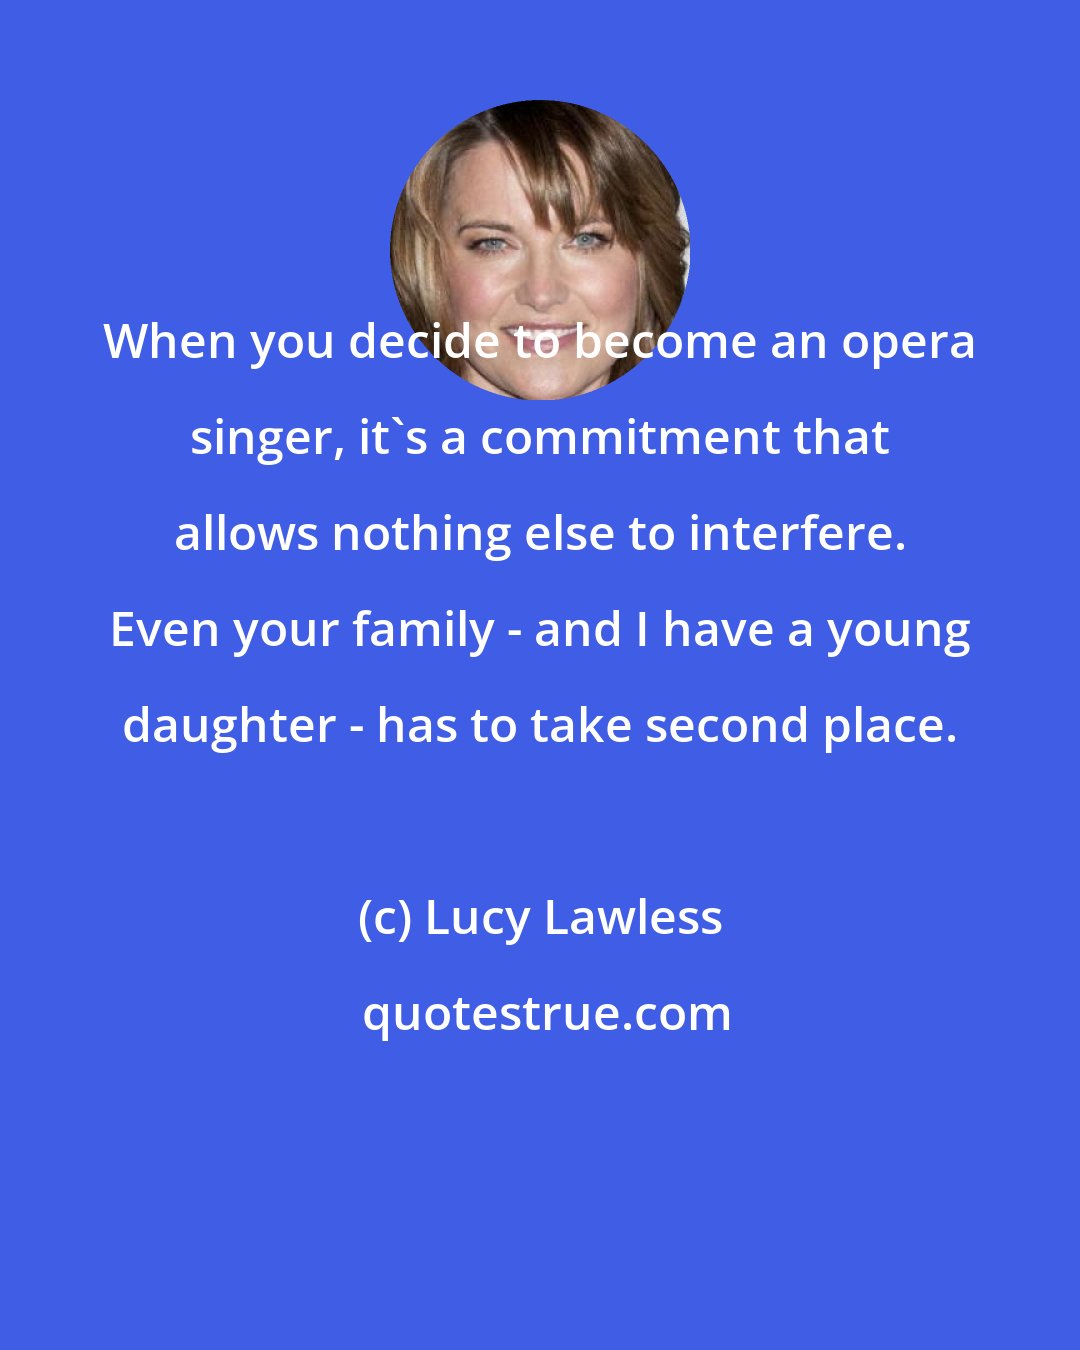 Lucy Lawless: When you decide to become an opera singer, it's a commitment that allows nothing else to interfere. Even your family - and I have a young daughter - has to take second place.